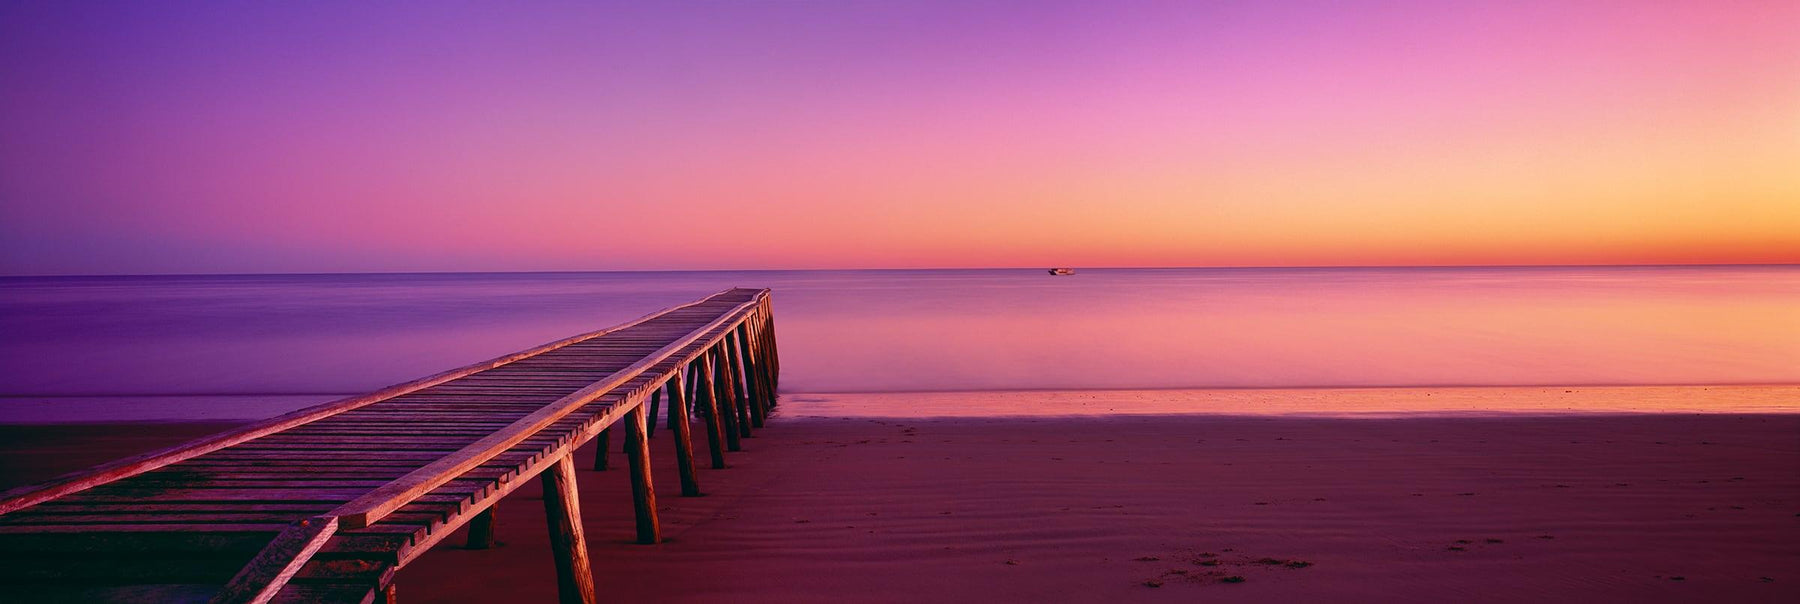 Old timber jetty stretching out over the sand beach of Hervey Bay Australia during a pink sunrise